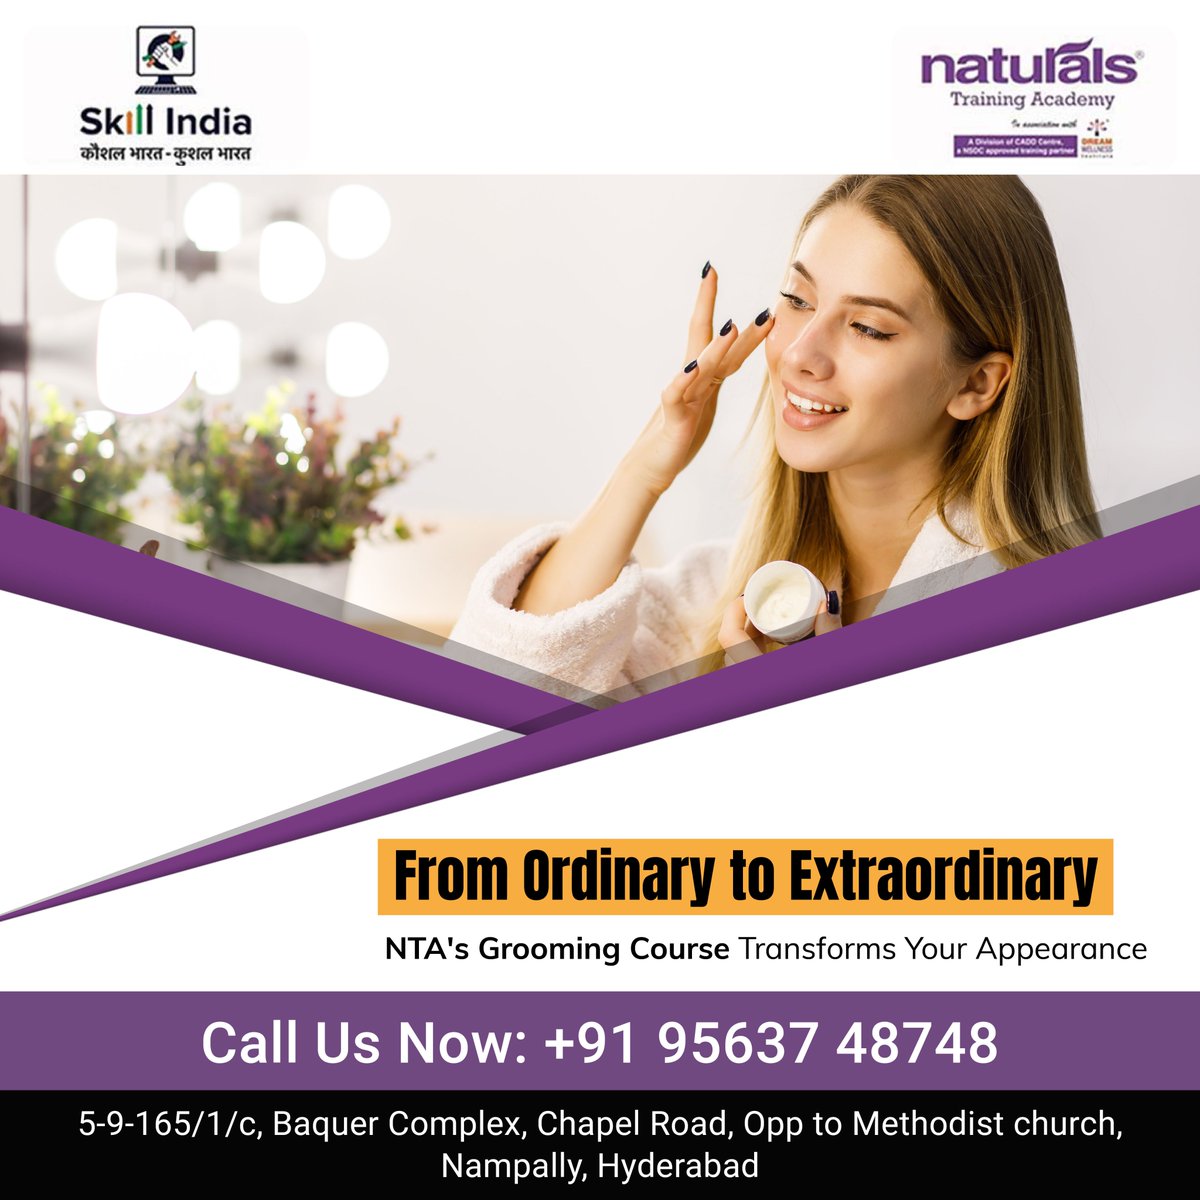 Experience the transformation from ordinary to extraordinary with Naturals Training Academy's grooming course. Contact Us: 95637 48748 visit : naturalsacademy.com #ordinarytoextraordinary #groomingcourse #naturalstrainingacademy #nta #nampally #hyderabad